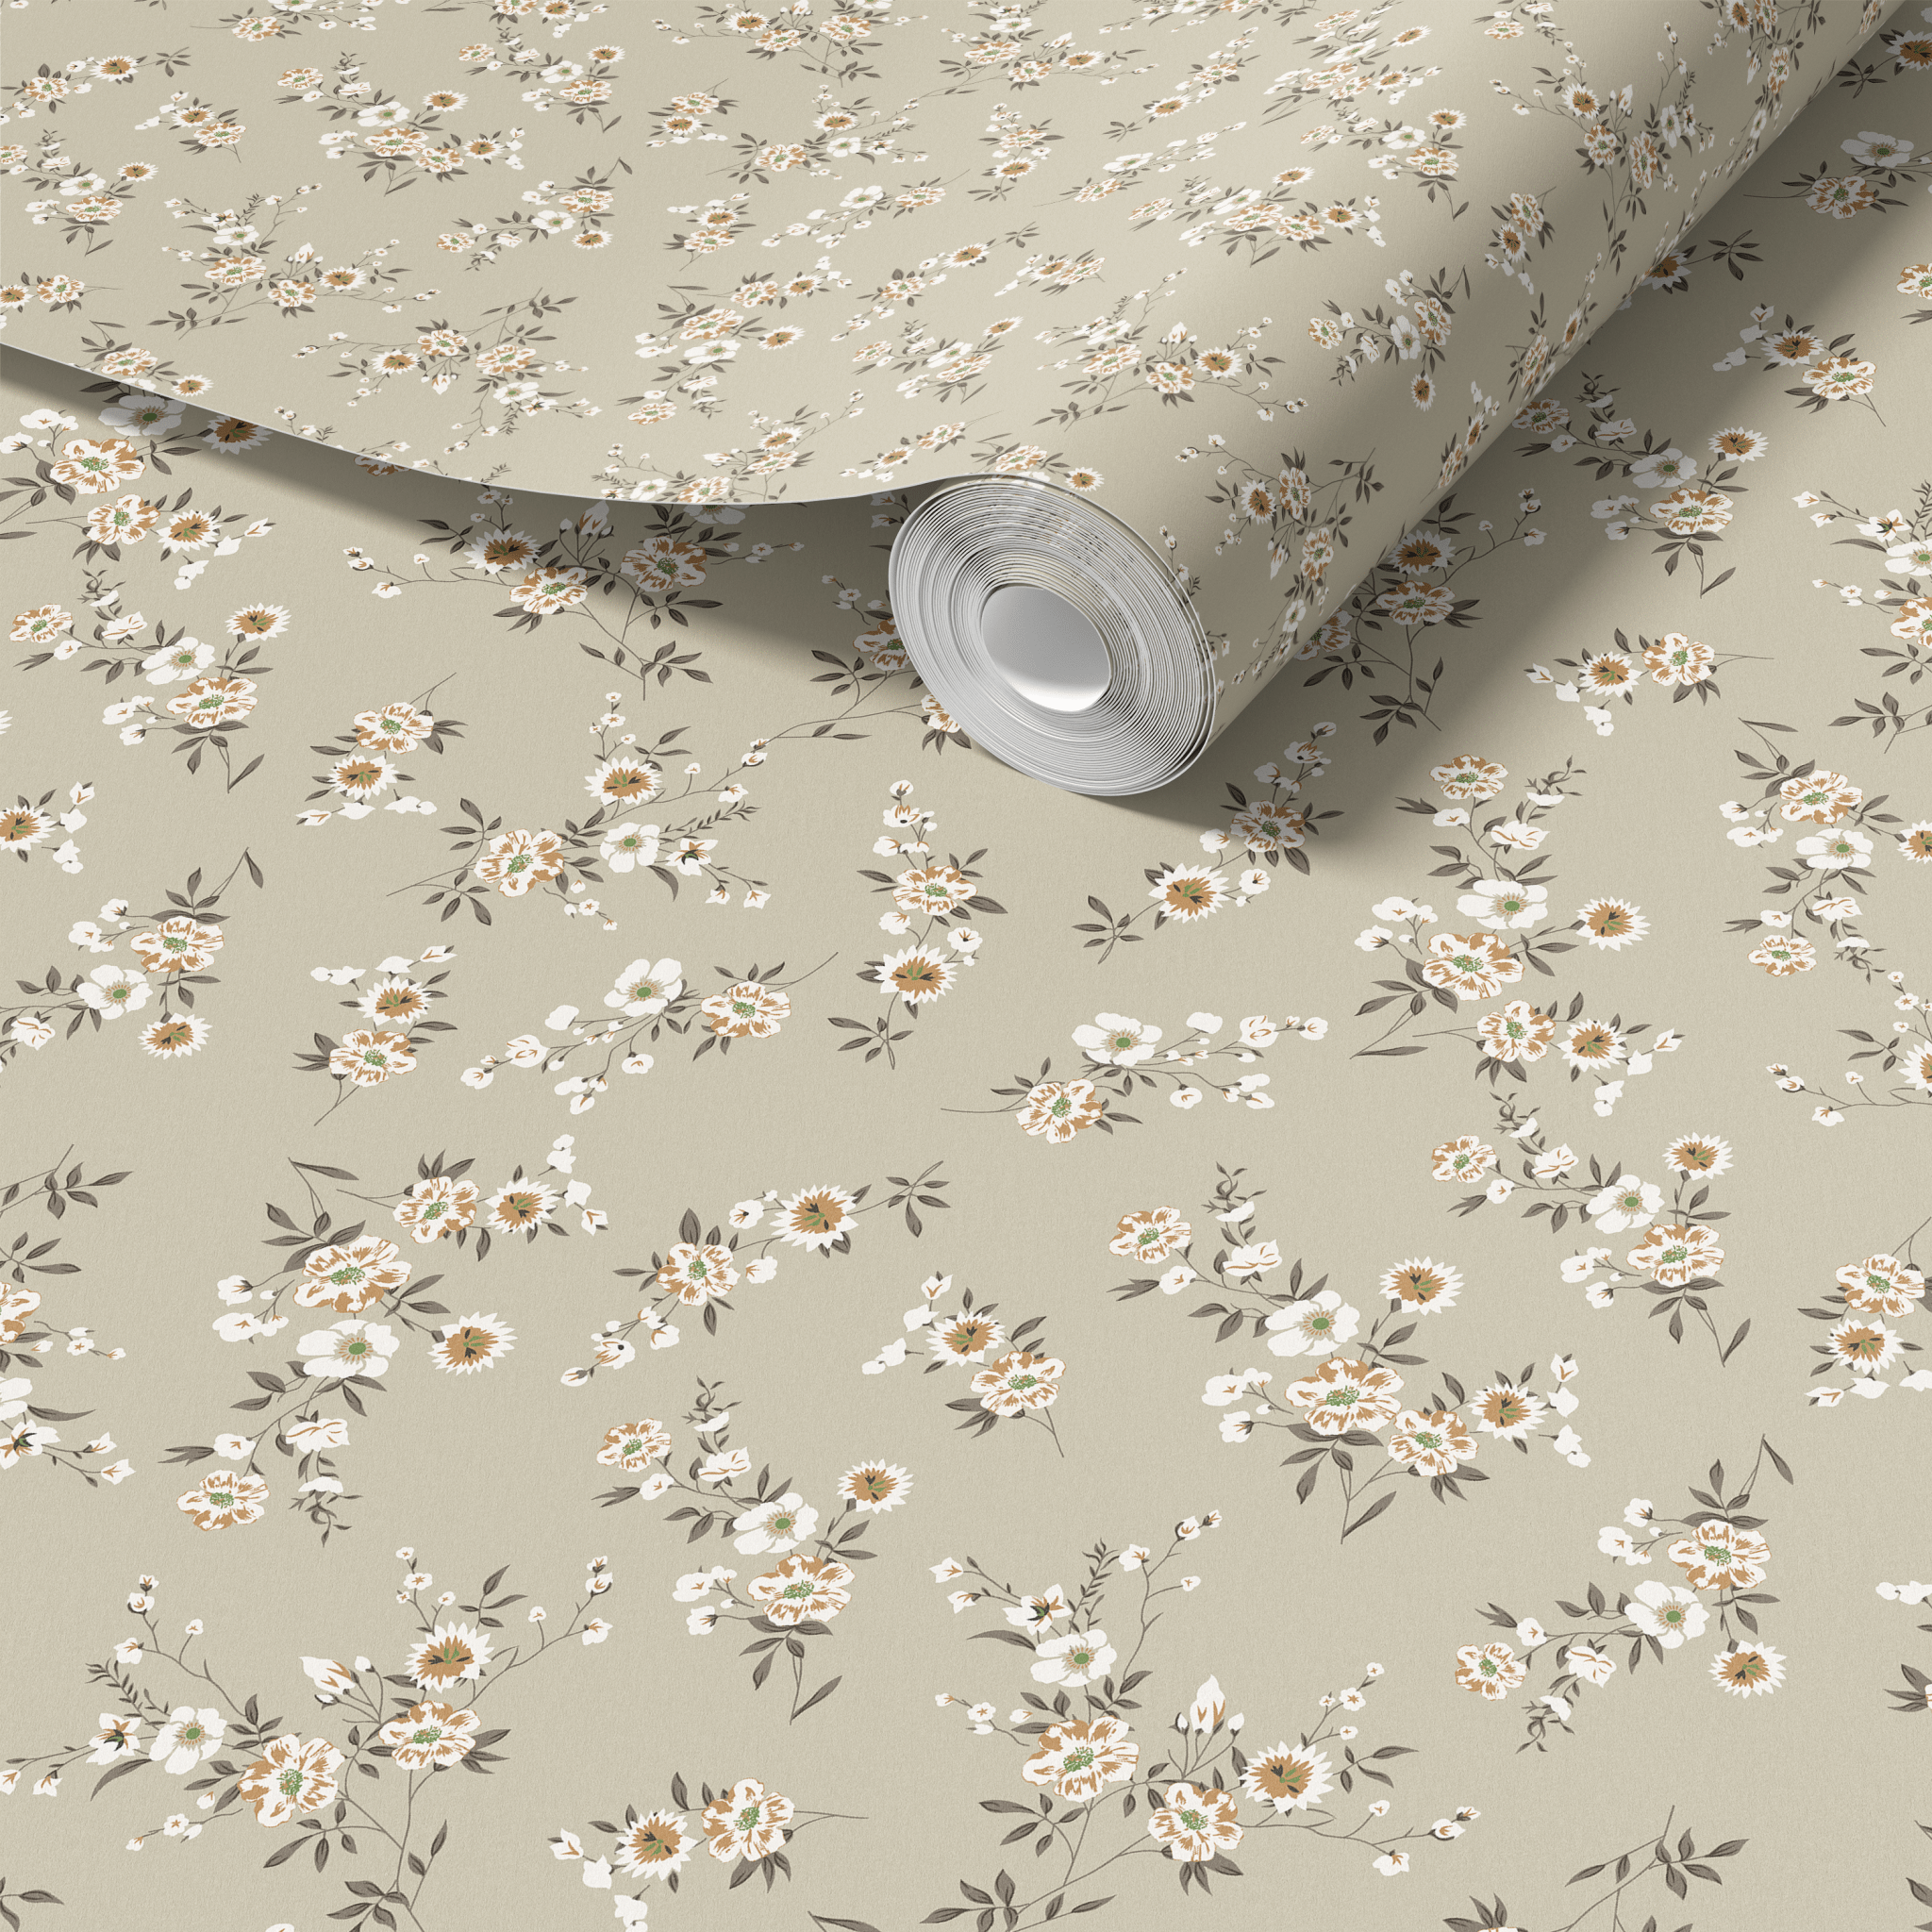 Roll of premium wallpaper partially unfurled, showing texture and design continuity. Neutral florals for versatile home or office decor enhancement